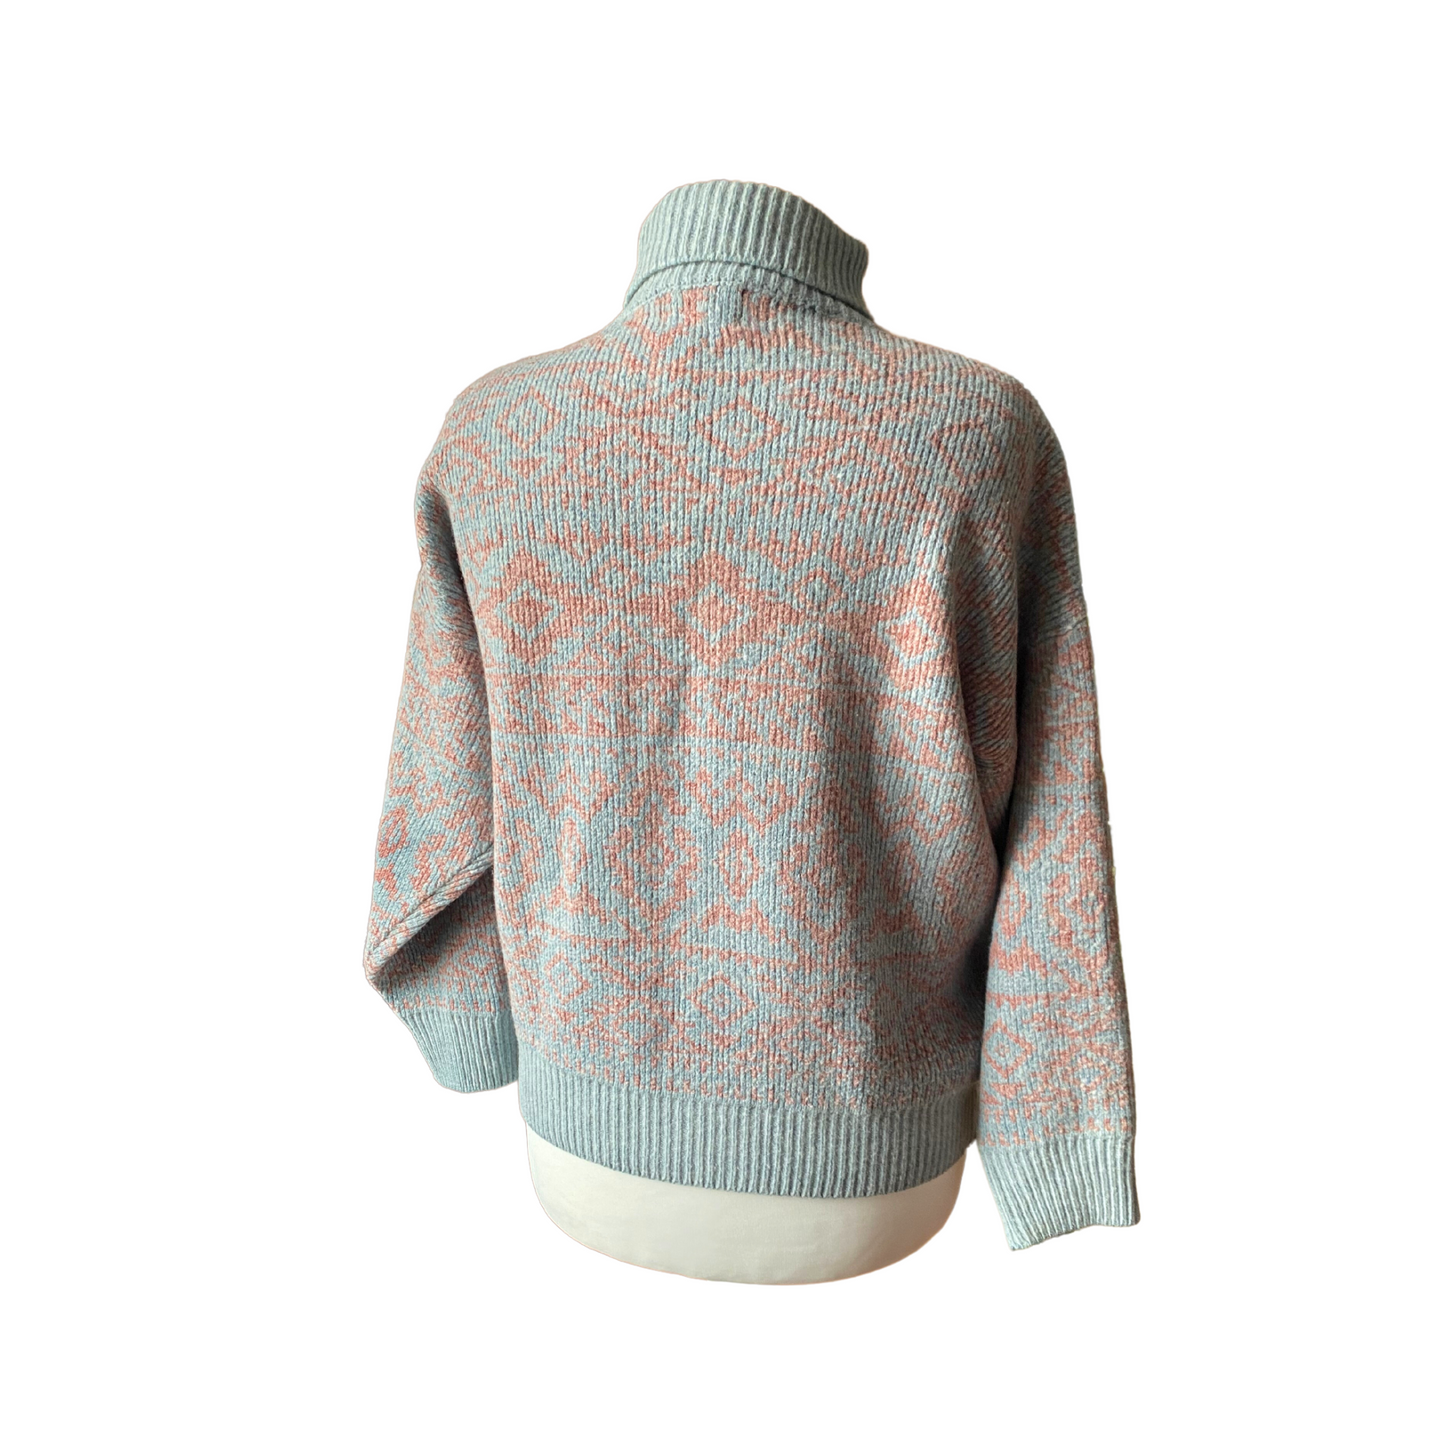 Stay warm in  this 80s geometric print roll neck sweater